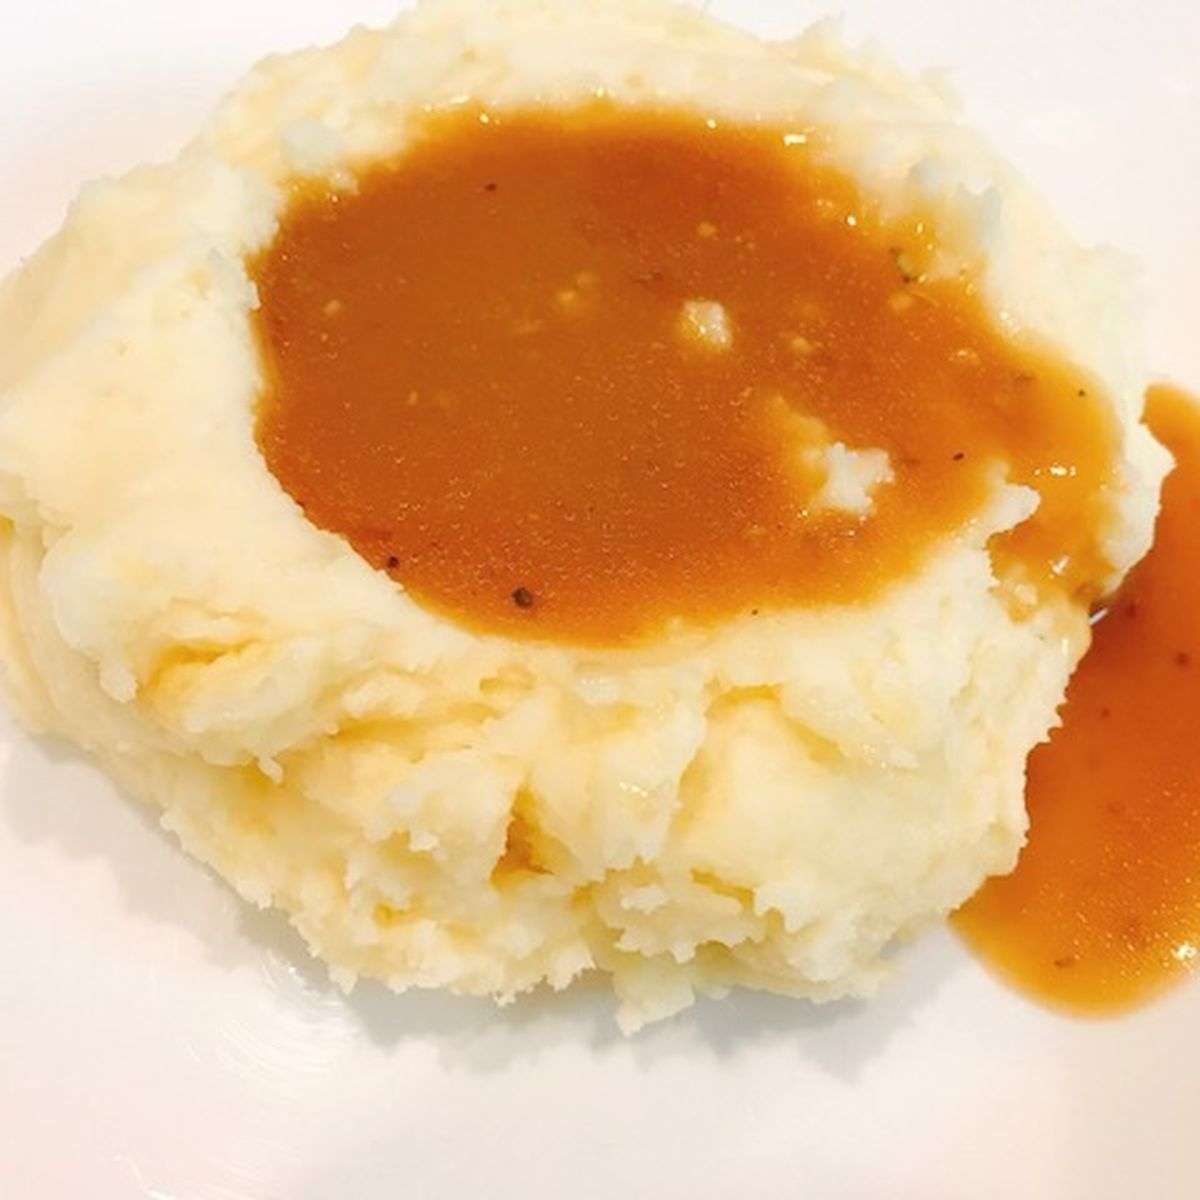 Collection 100+ Images picture of mashed potatoes and gravy Updated